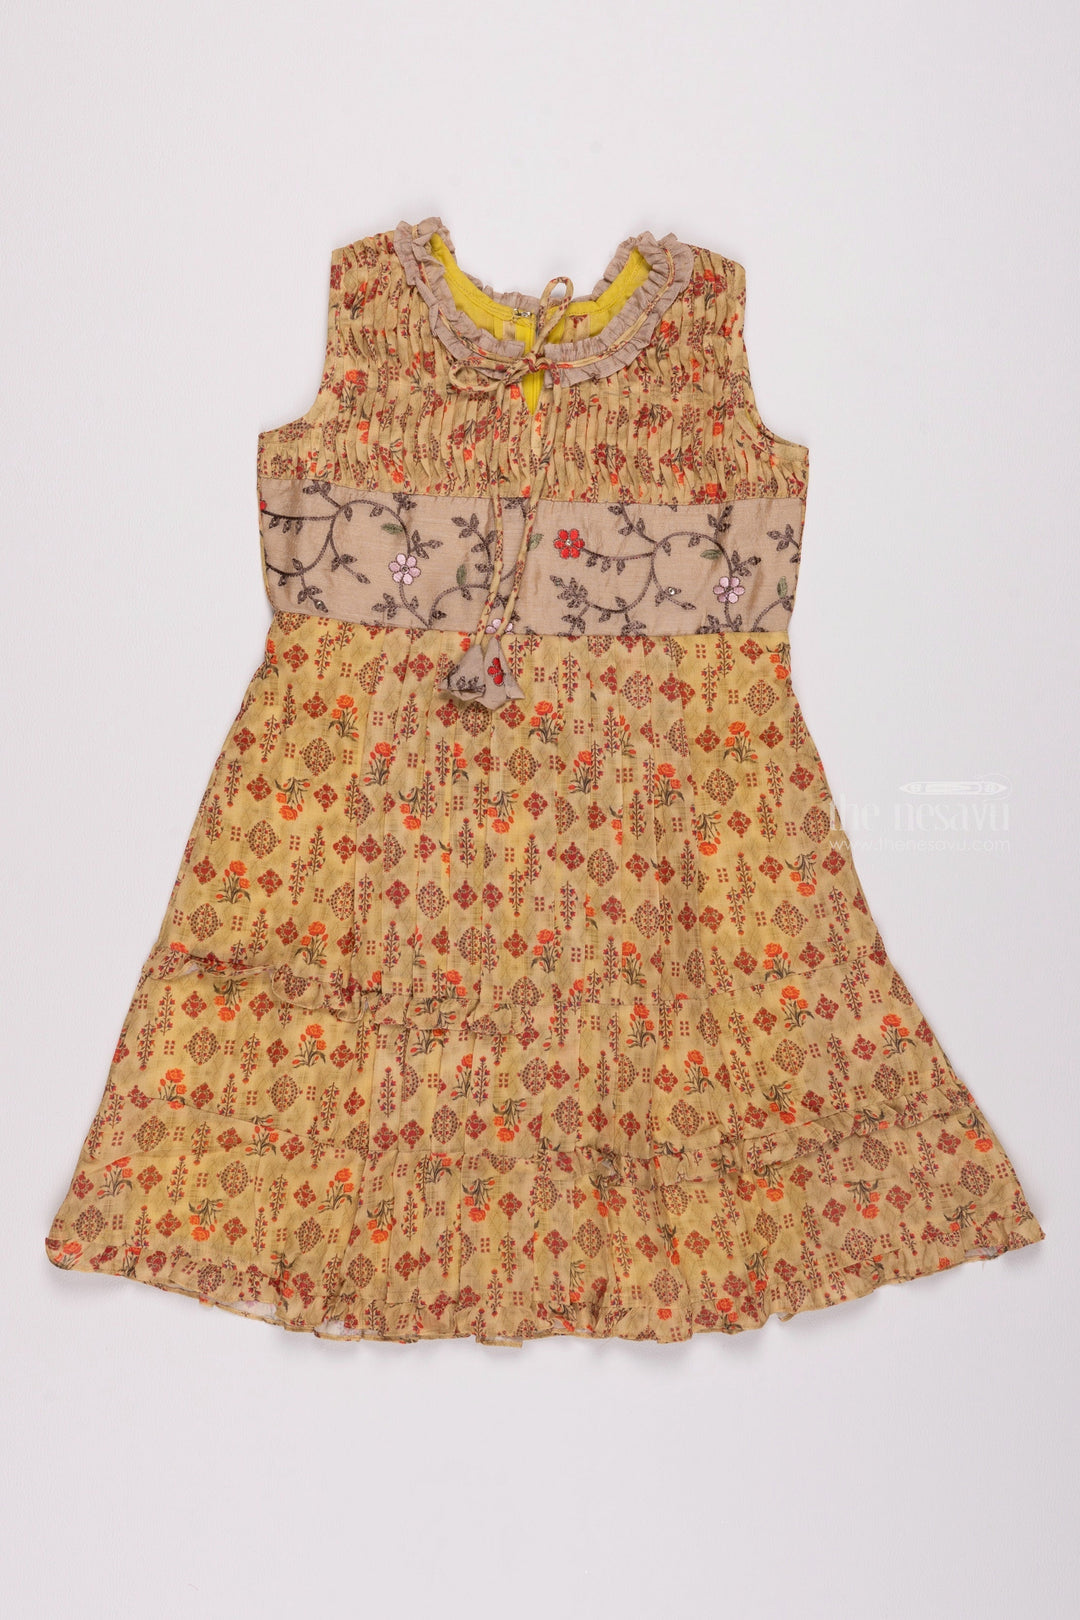 The Nesavu Girls Cotton Frock Sunny Vibes: Floral Printed Pleated Yellow Cotton Frock for Girls Nesavu 22 (4Y) / Yellow / Chanderi GFC1155B-22 Shop Elegant Cotton Frocks: Stylish & Casual Dresses for Kids